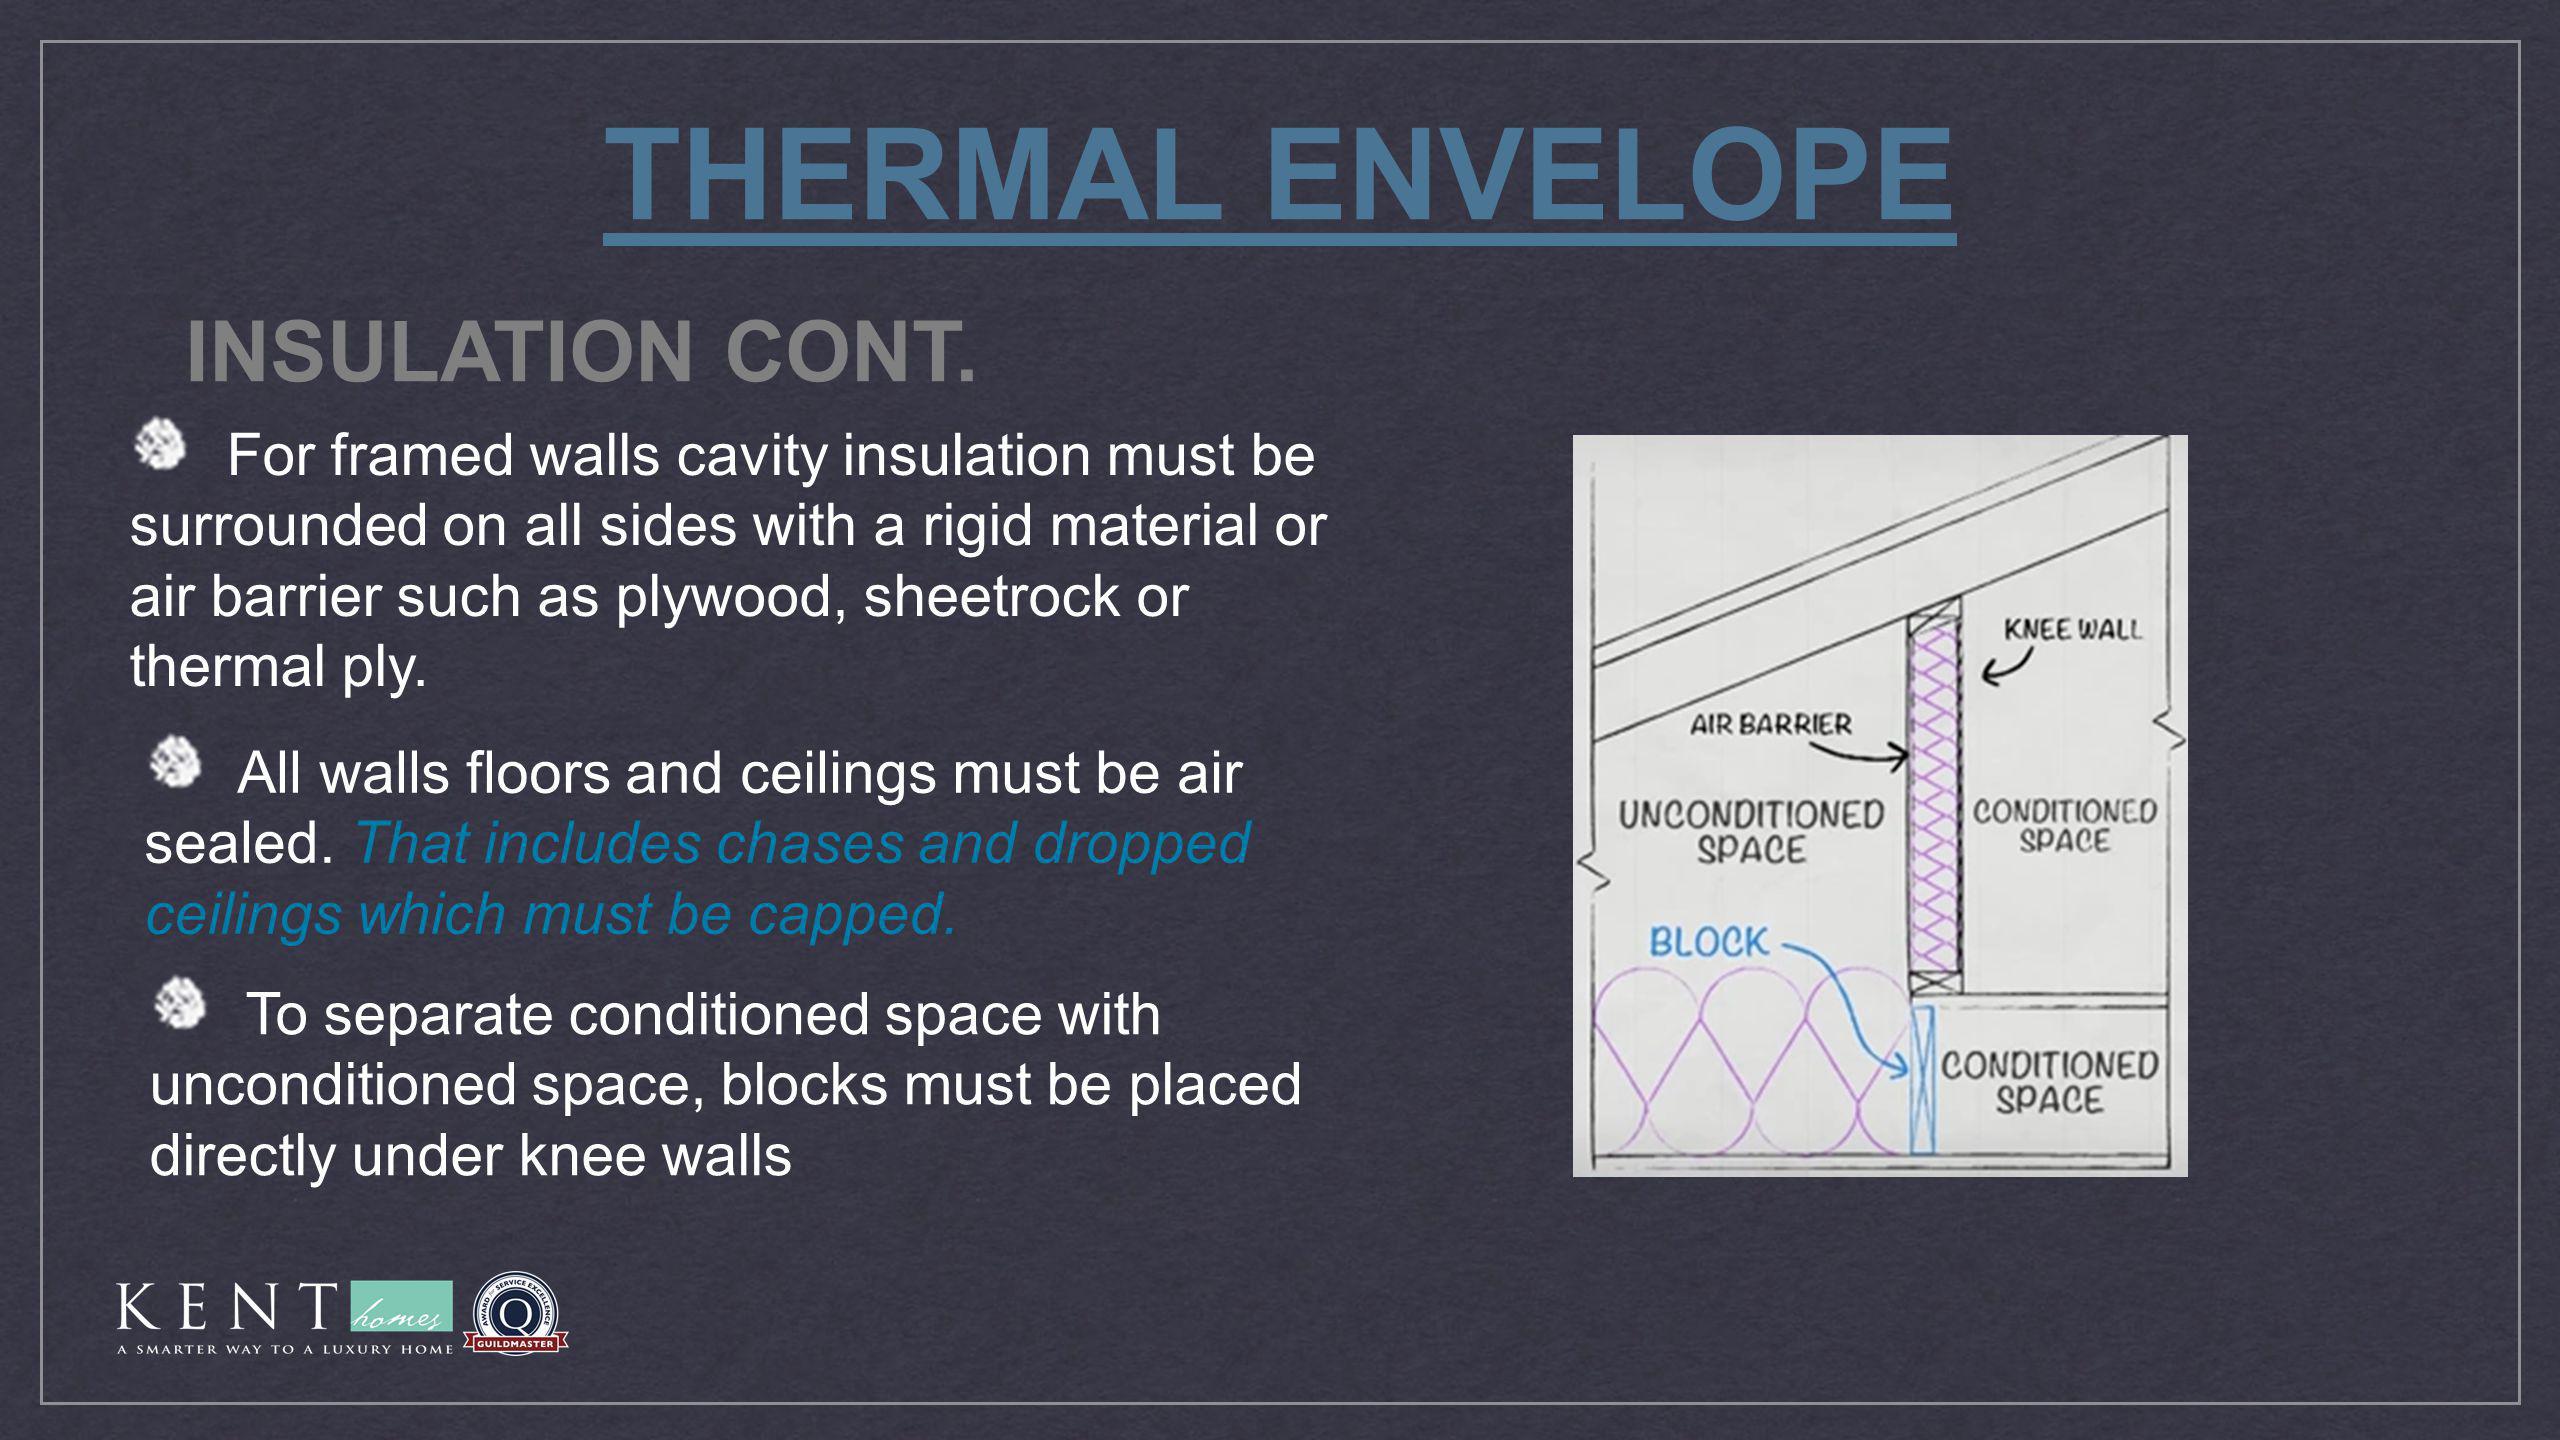 THERMAL ENVELOPE For framed walls cavity insulation must be surrounded on all sides with a rigid material or air barrier such as plywood, sheetrock or thermal ply.